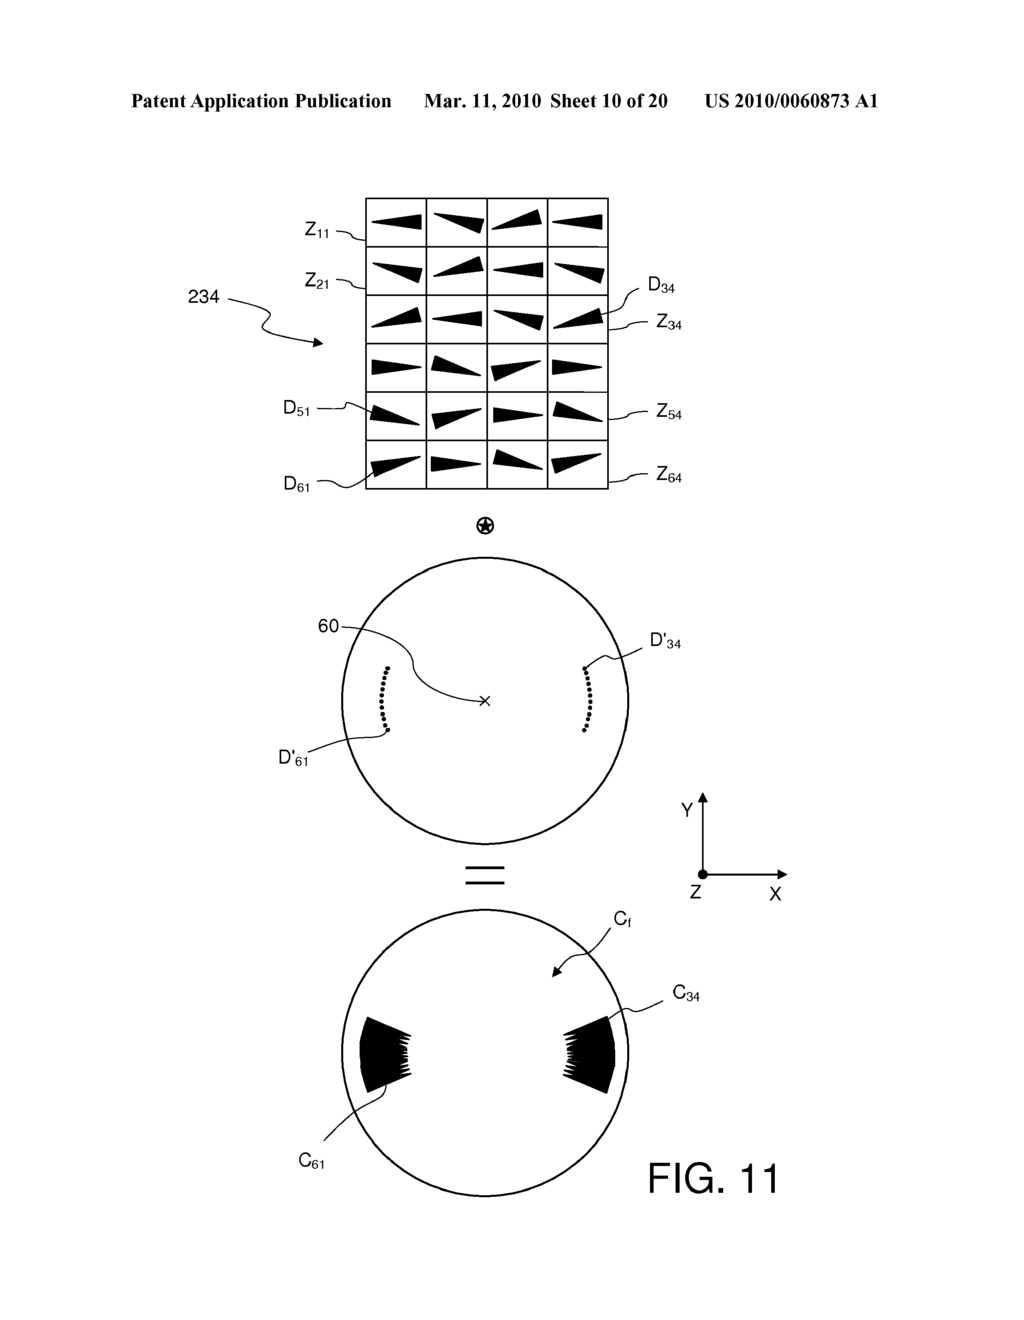 ILLUMINATION SYSTEM FOR ILLUMINATING A MASK IN A MICROLITHOGRAPHIC EXPOSURE APPARATUS - diagram, schematic, and image 11